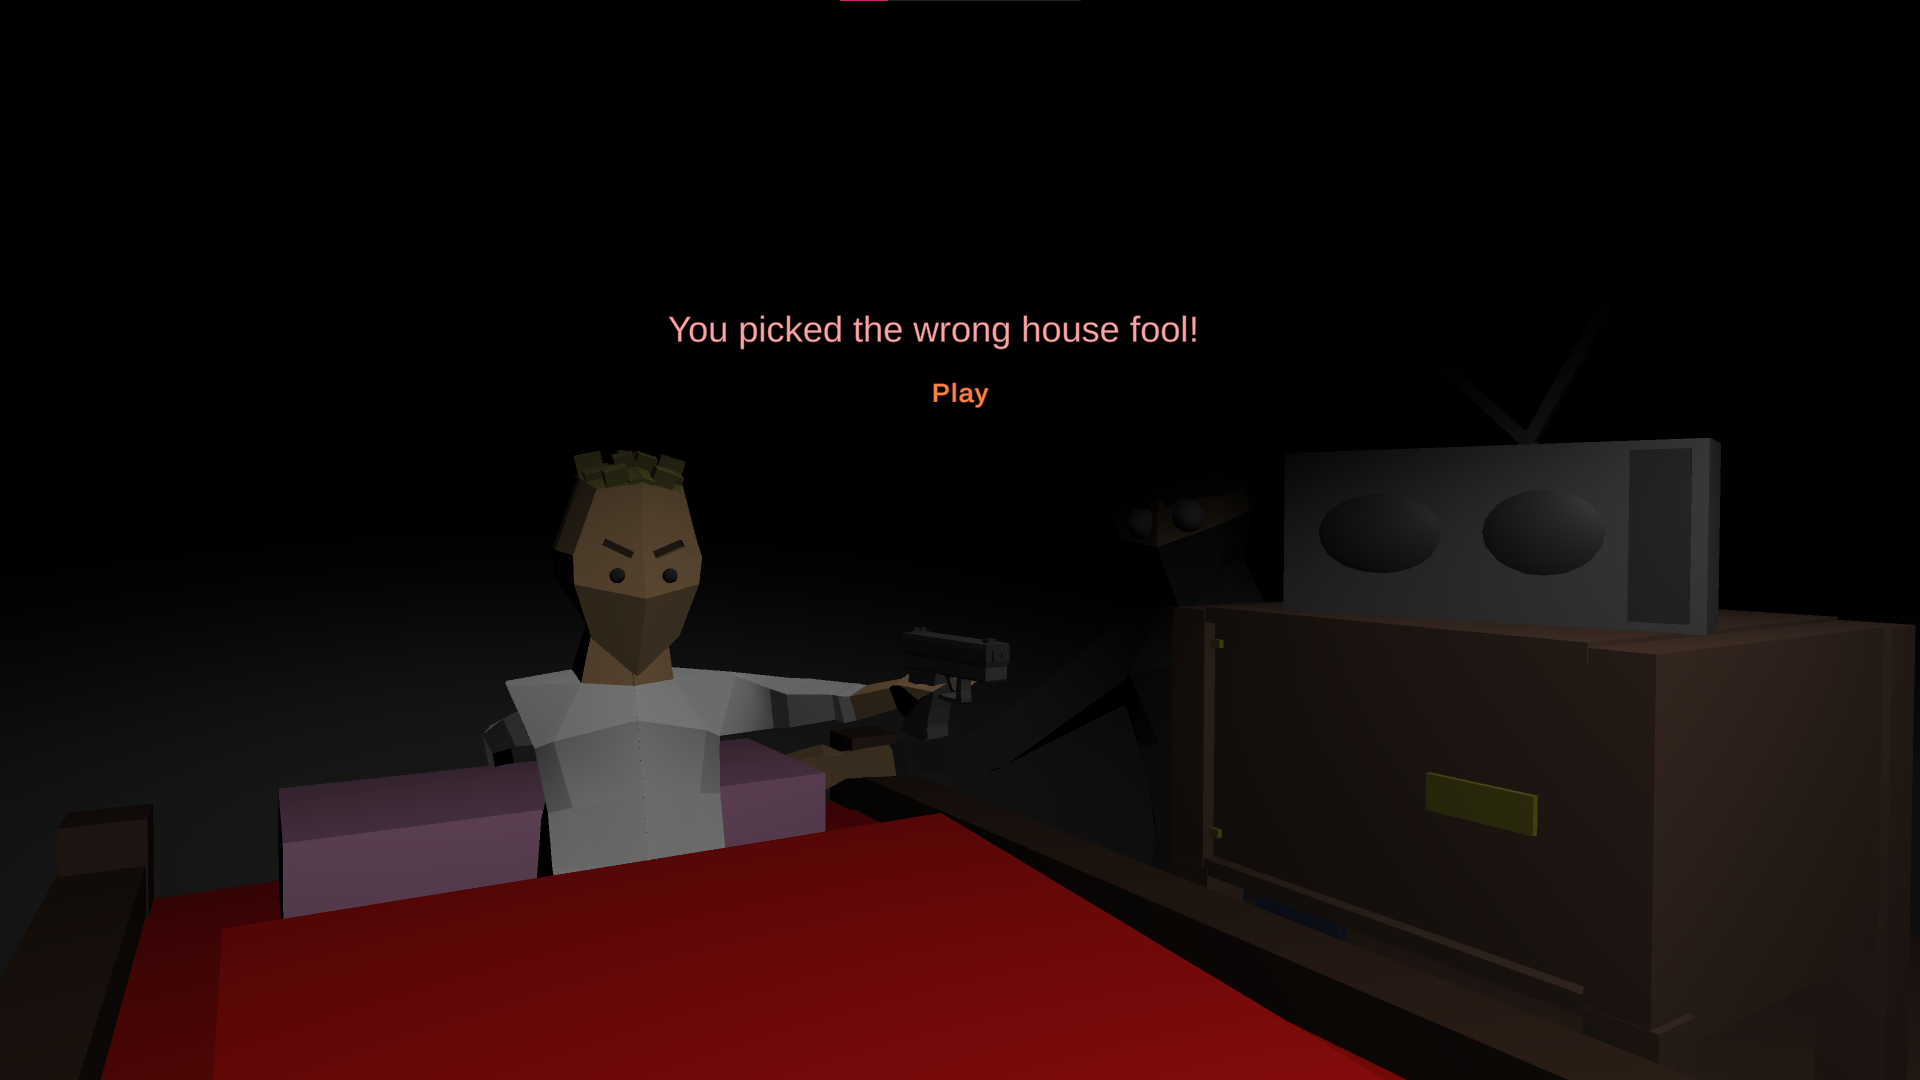 You picked the wrong house, fool!